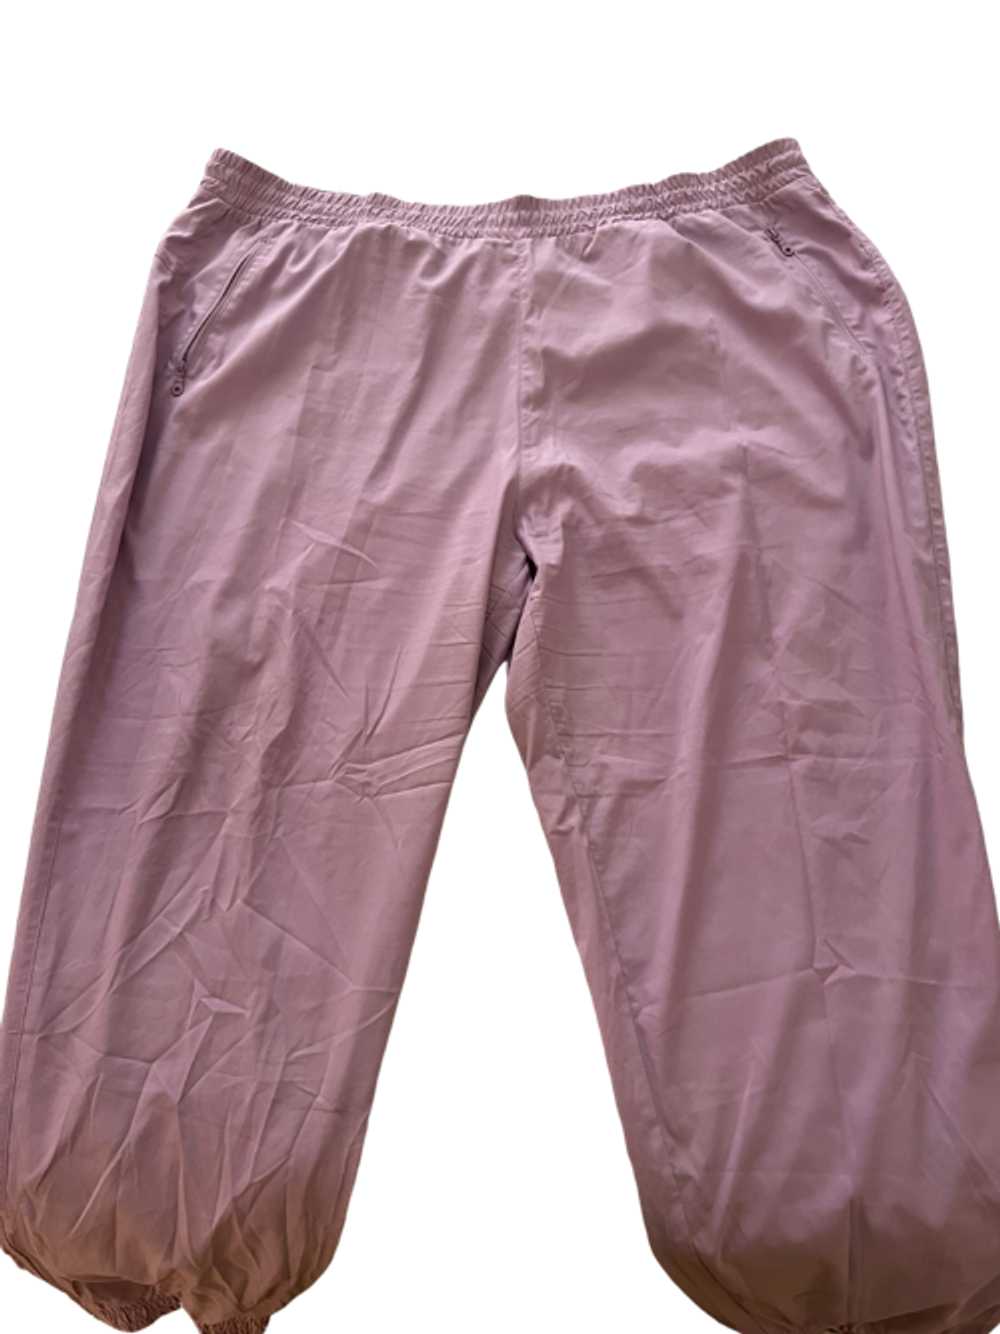 Girlfriend Collective Lilac Summit Track Pant - image 4